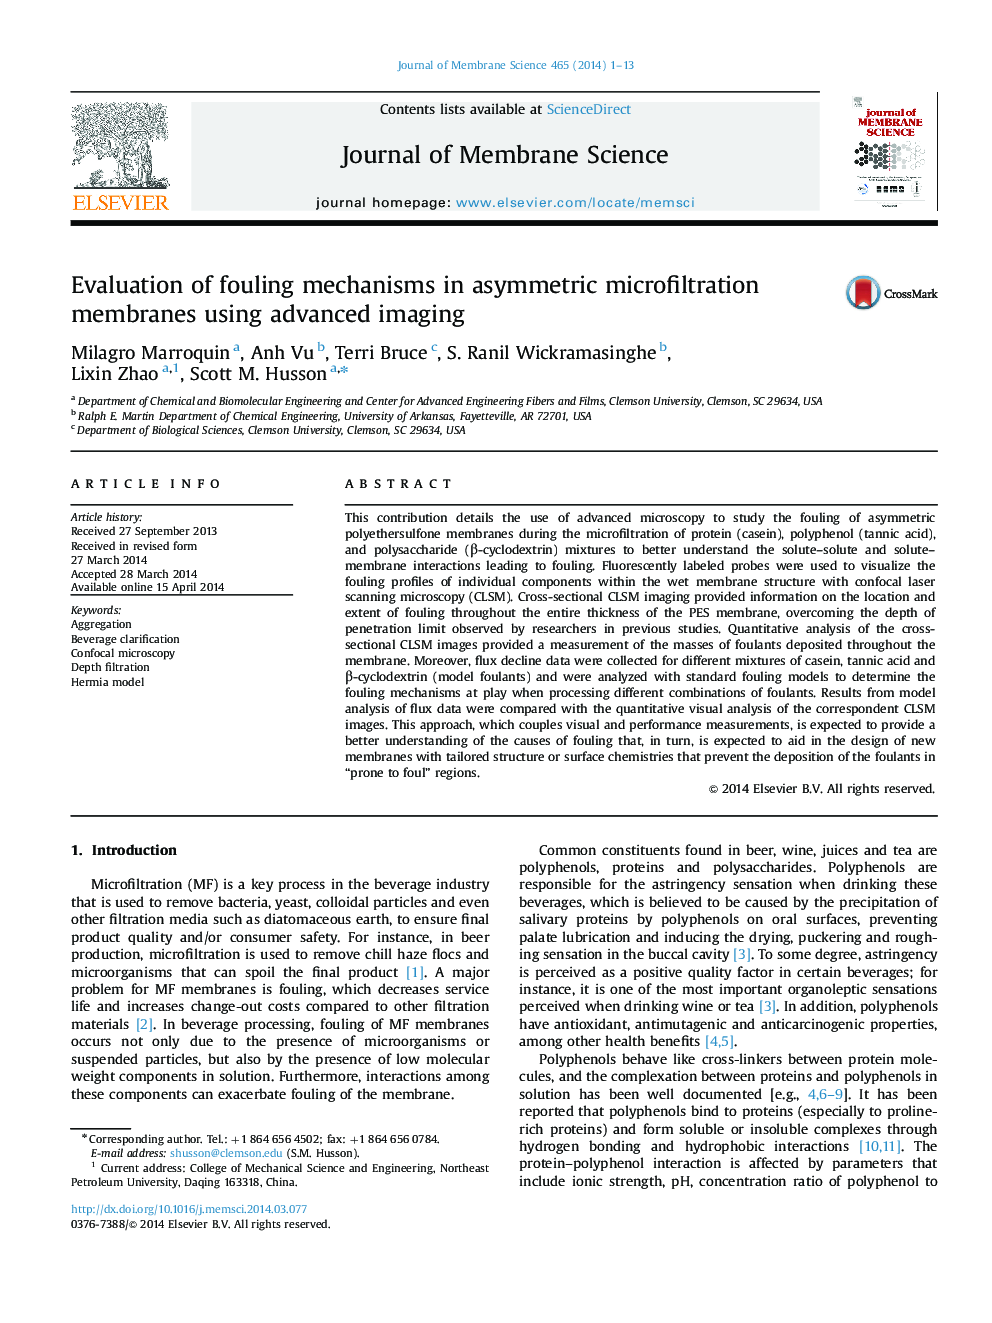 Evaluation of fouling mechanisms in asymmetric microfiltration membranes using advanced imaging